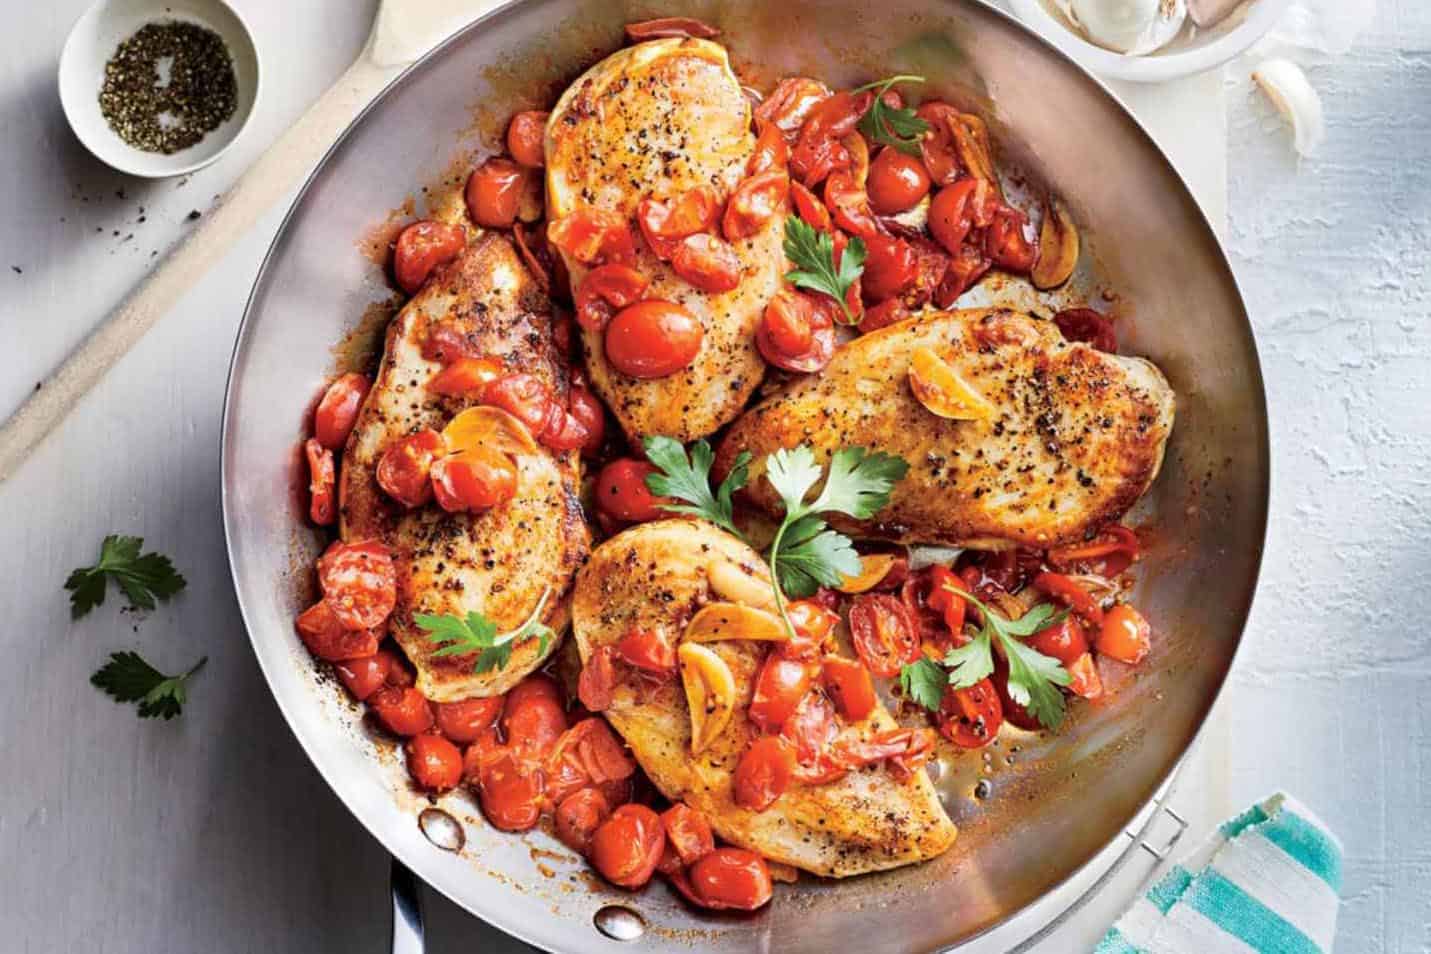 Pinot-Noir-and-Tomato-Based-Chicken-Dishes